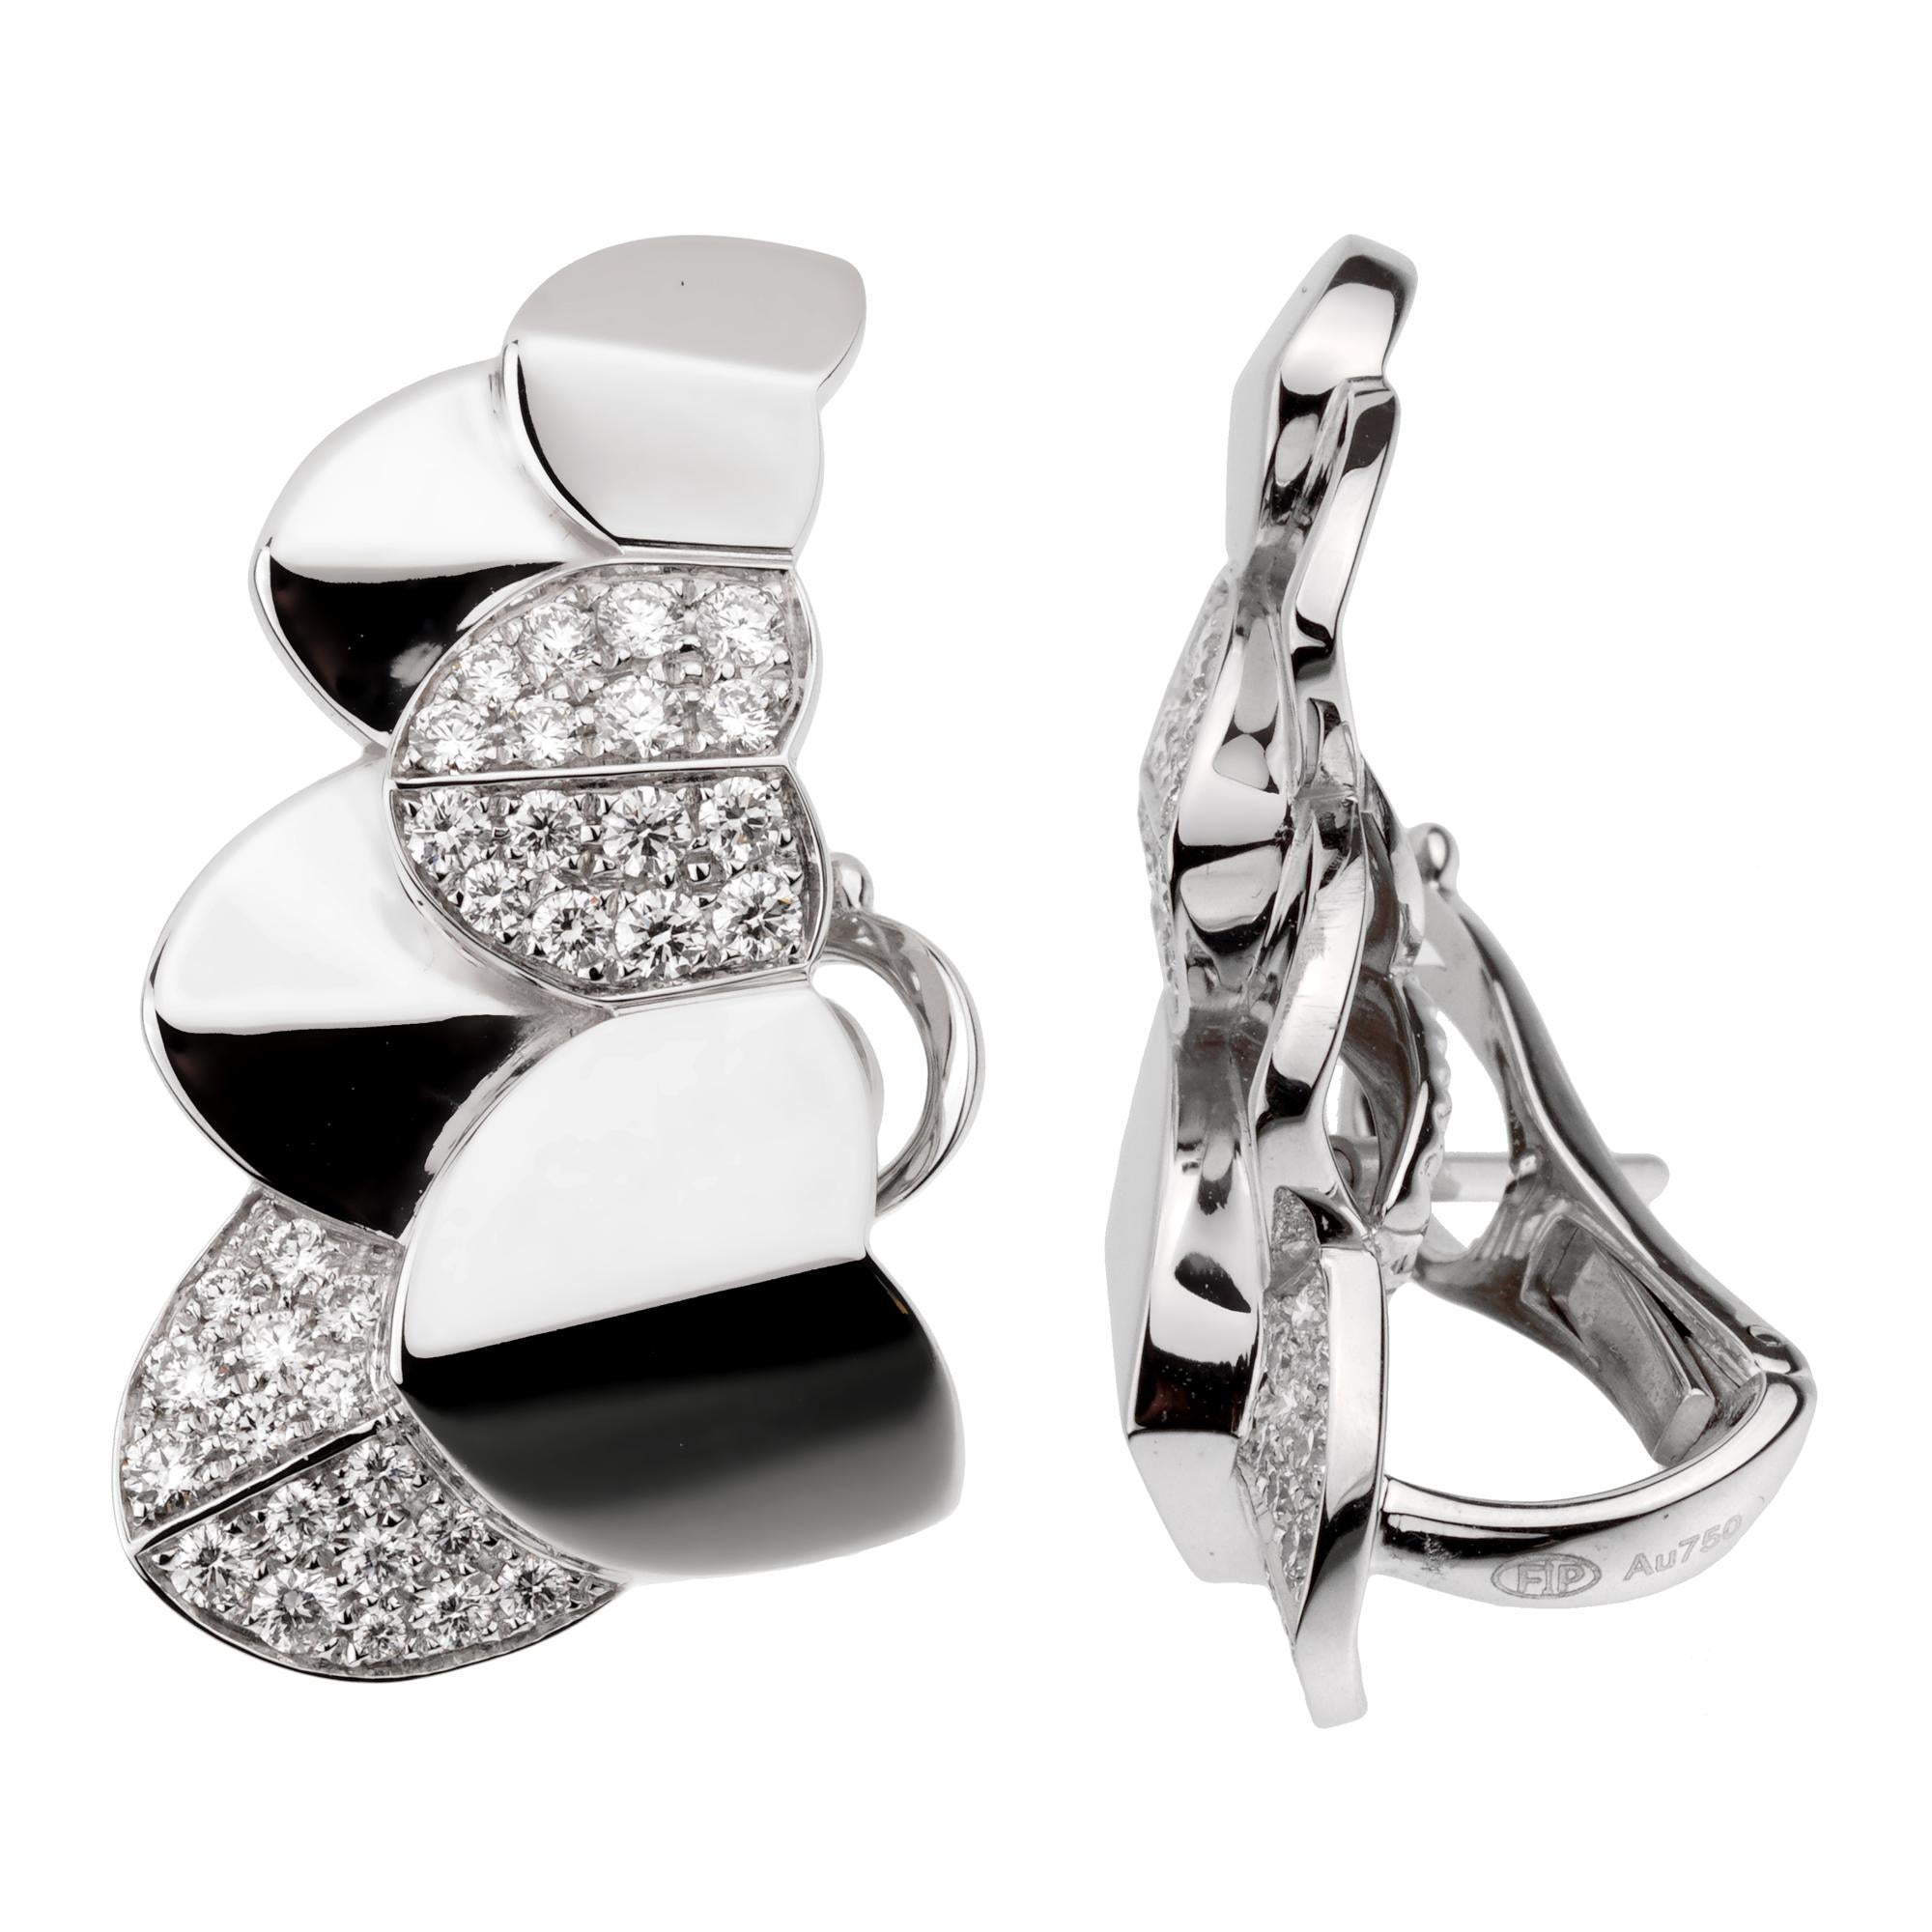 A fabulous brand new pair of Fred of Paris earrings showcasing a double arc motif in shimmering 18k white gold adorned with round brilliant cut diamonds. (.88ct) The earrings have a length of 1.10